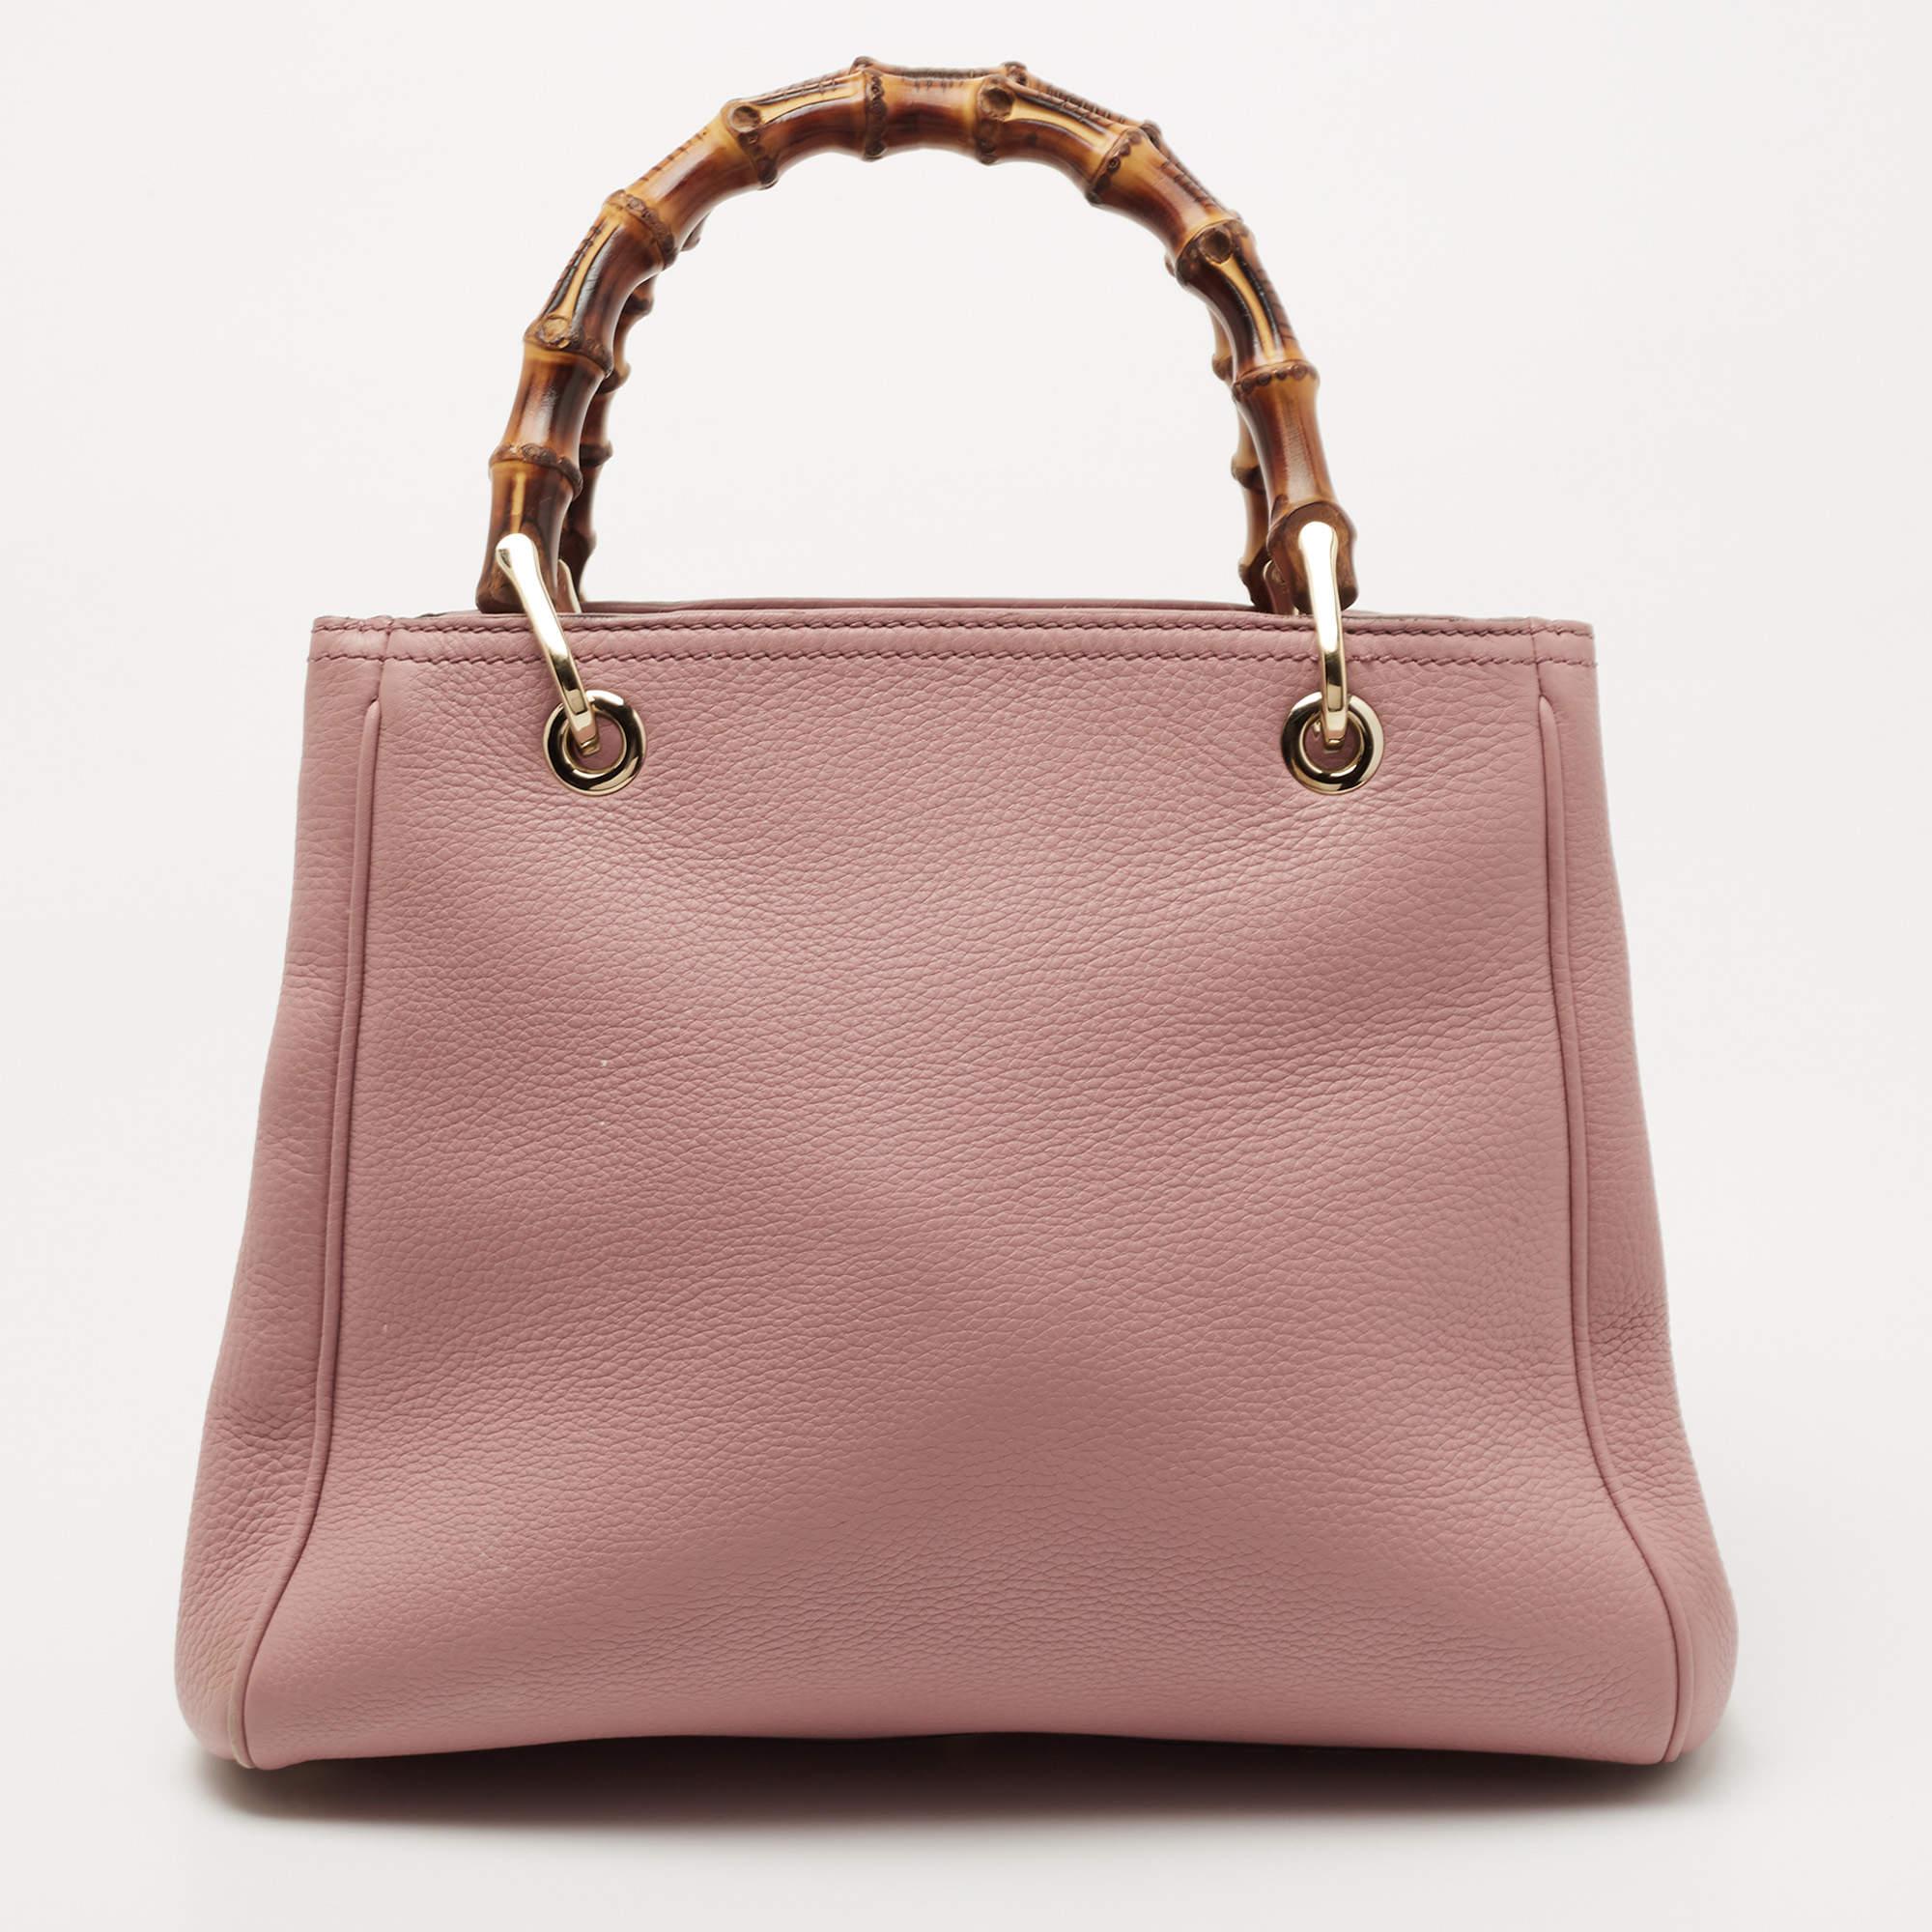 Gucci's luxe aesthetic and artistic inspiration comes from its rich history. And this stunning tote is a true example of that! The iconic Bamboo motif handles are perched atop this structured tote, perfectly completing its old rose exterior. Fitted